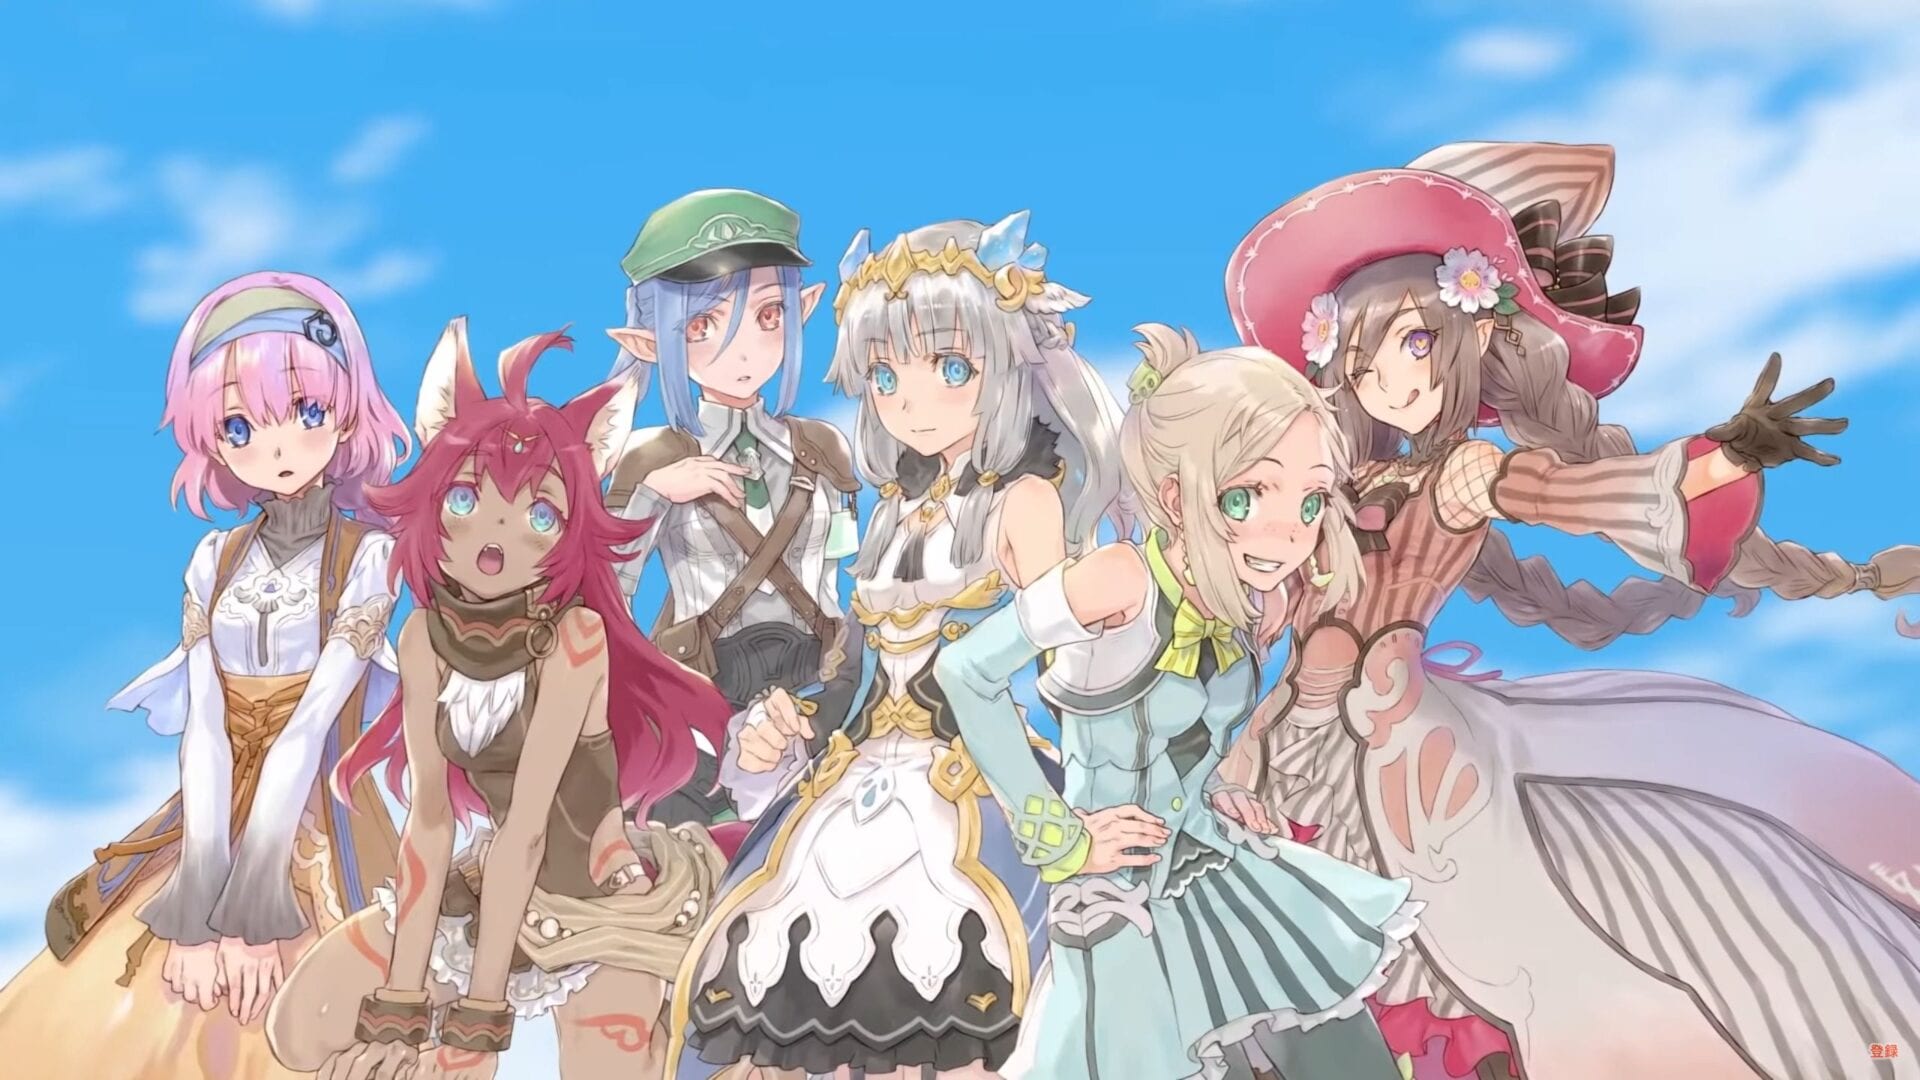 Rune Factory 5 for Nintendo Switch Gets New Trailer Full of Waifus